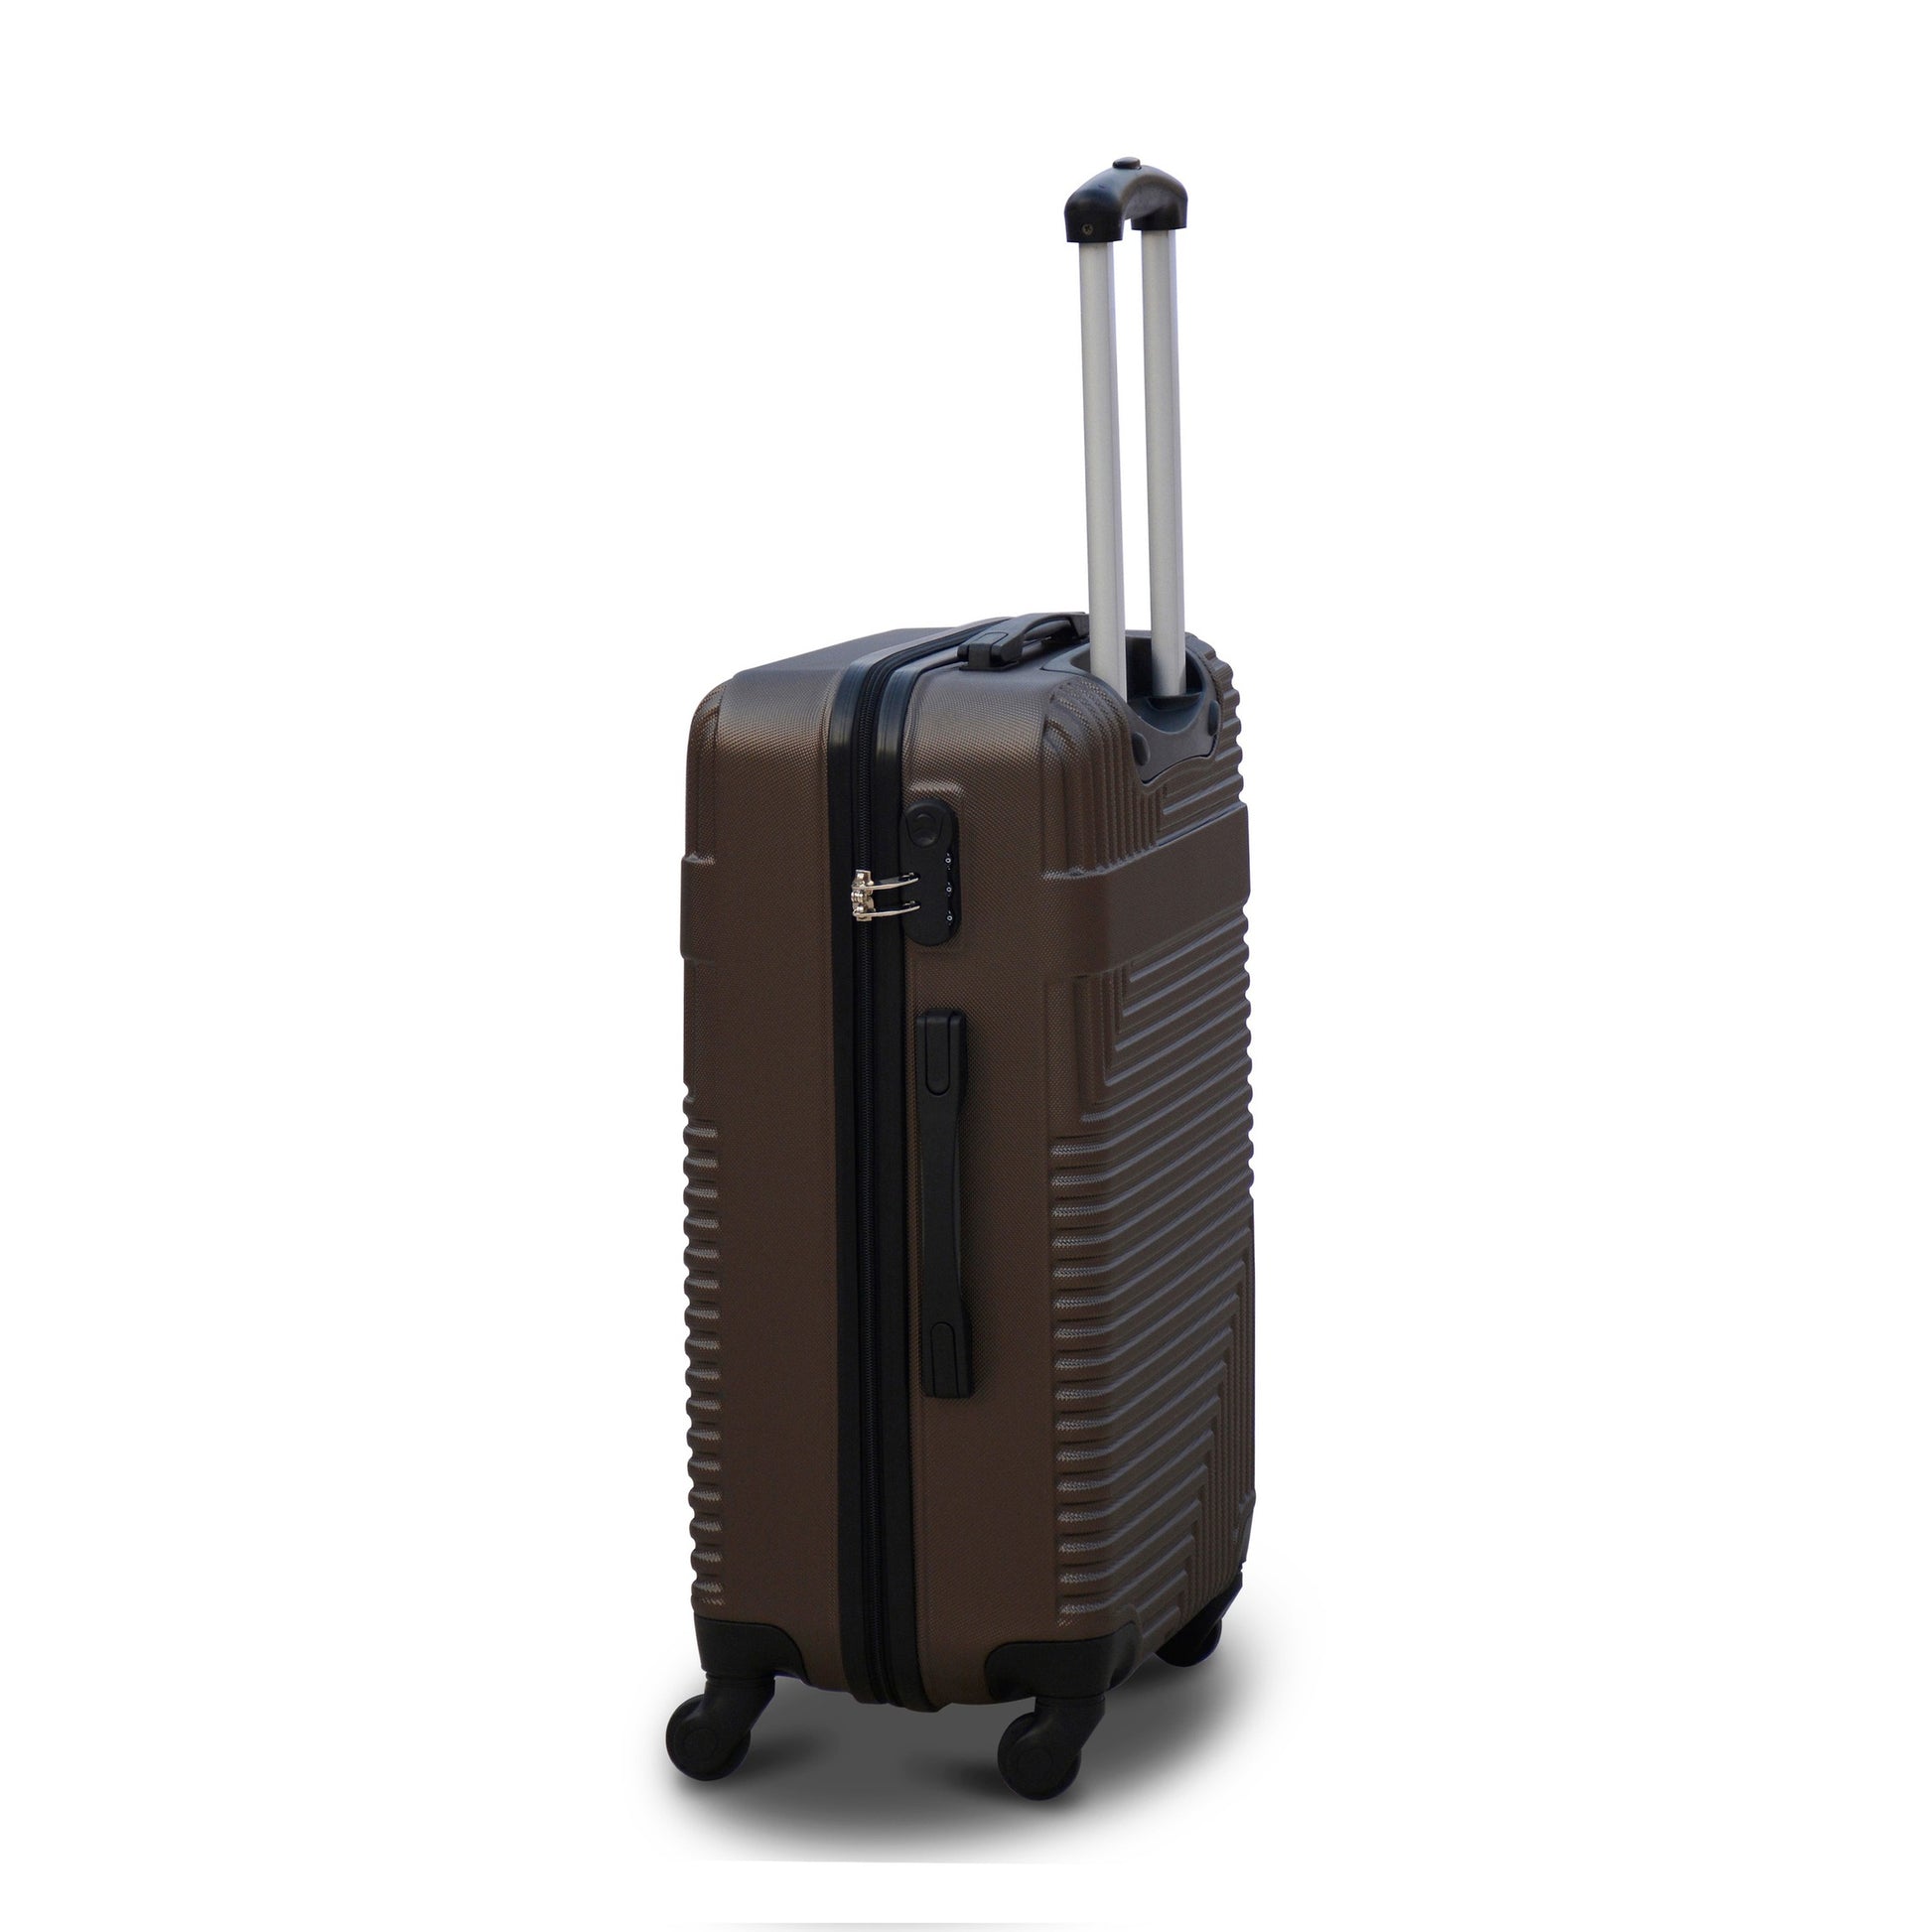 20" Brown Colour Travel Way ABS Luggage Lightweight Hard Case Carry On Trolley Bag Zaappy.com